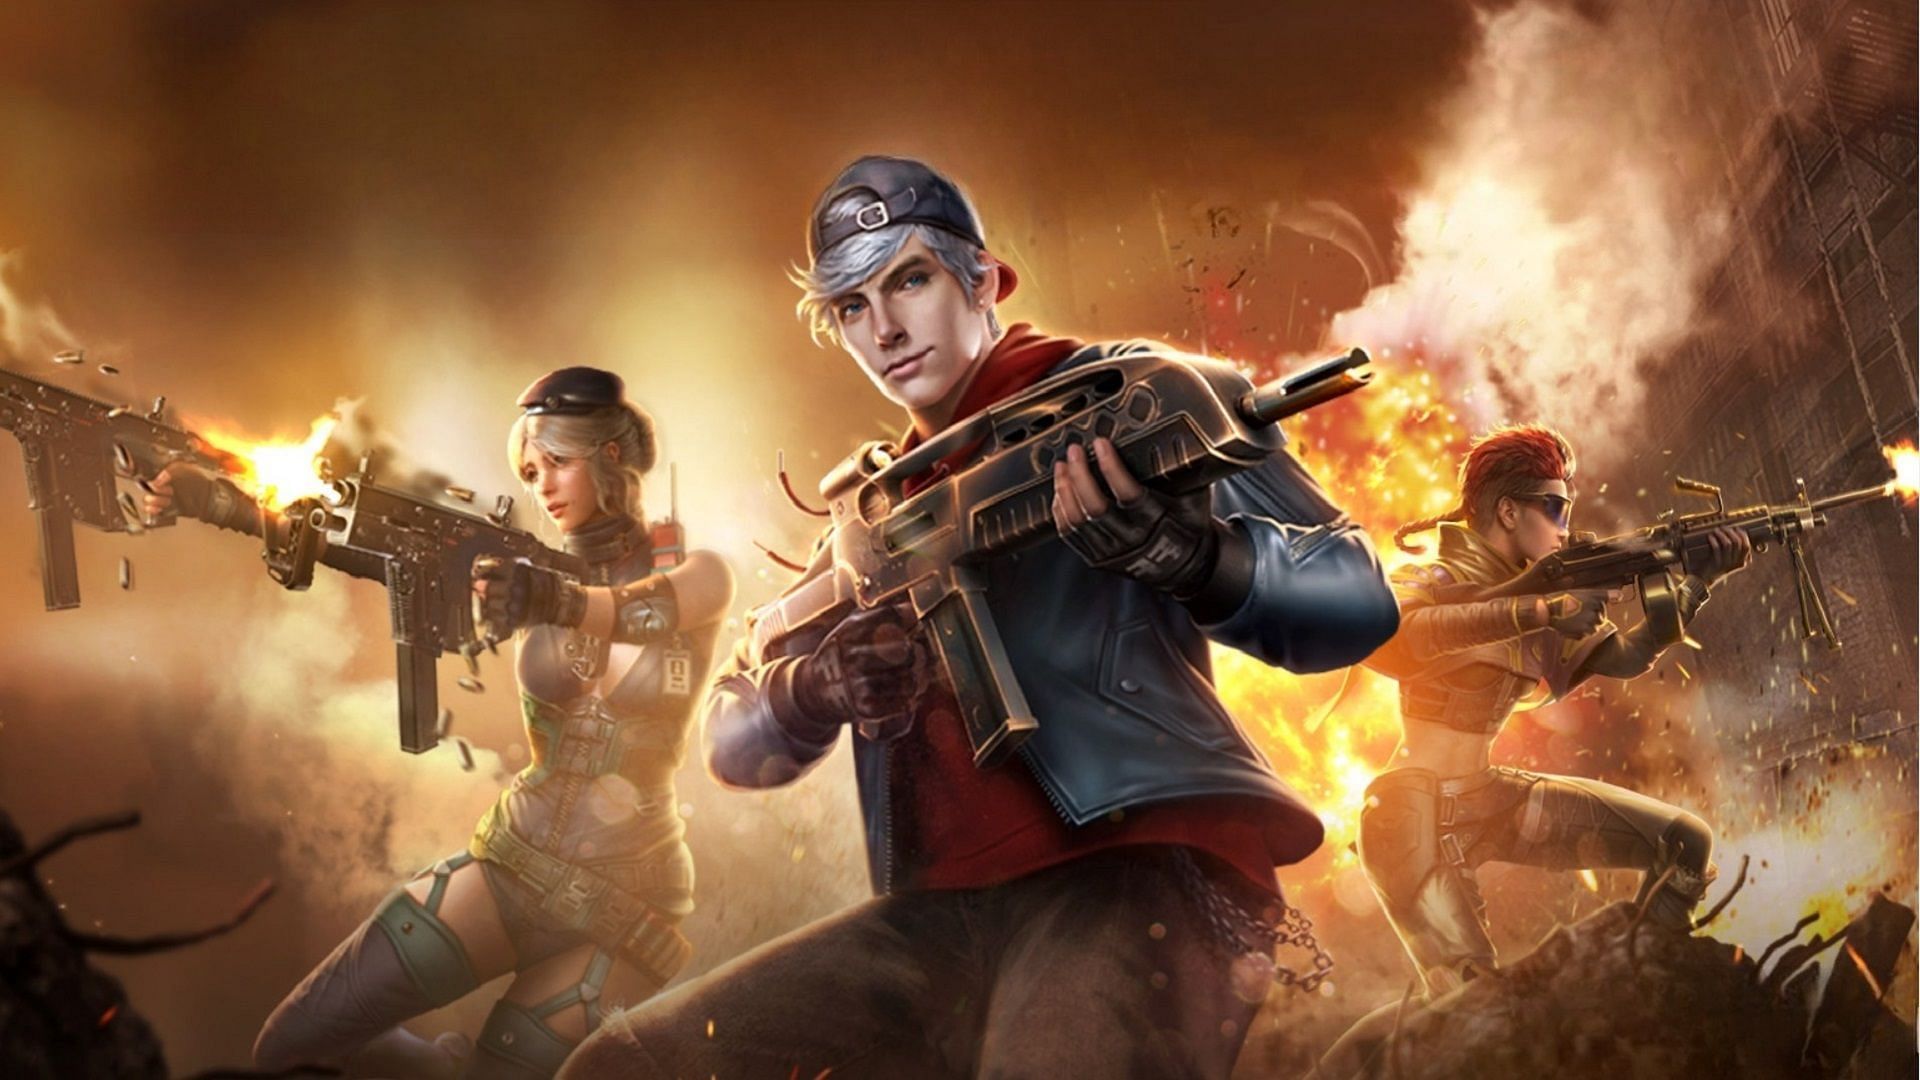 Free Fire MAX is expected to shut down soon as per the message on the Brazil server (Image via Garena)